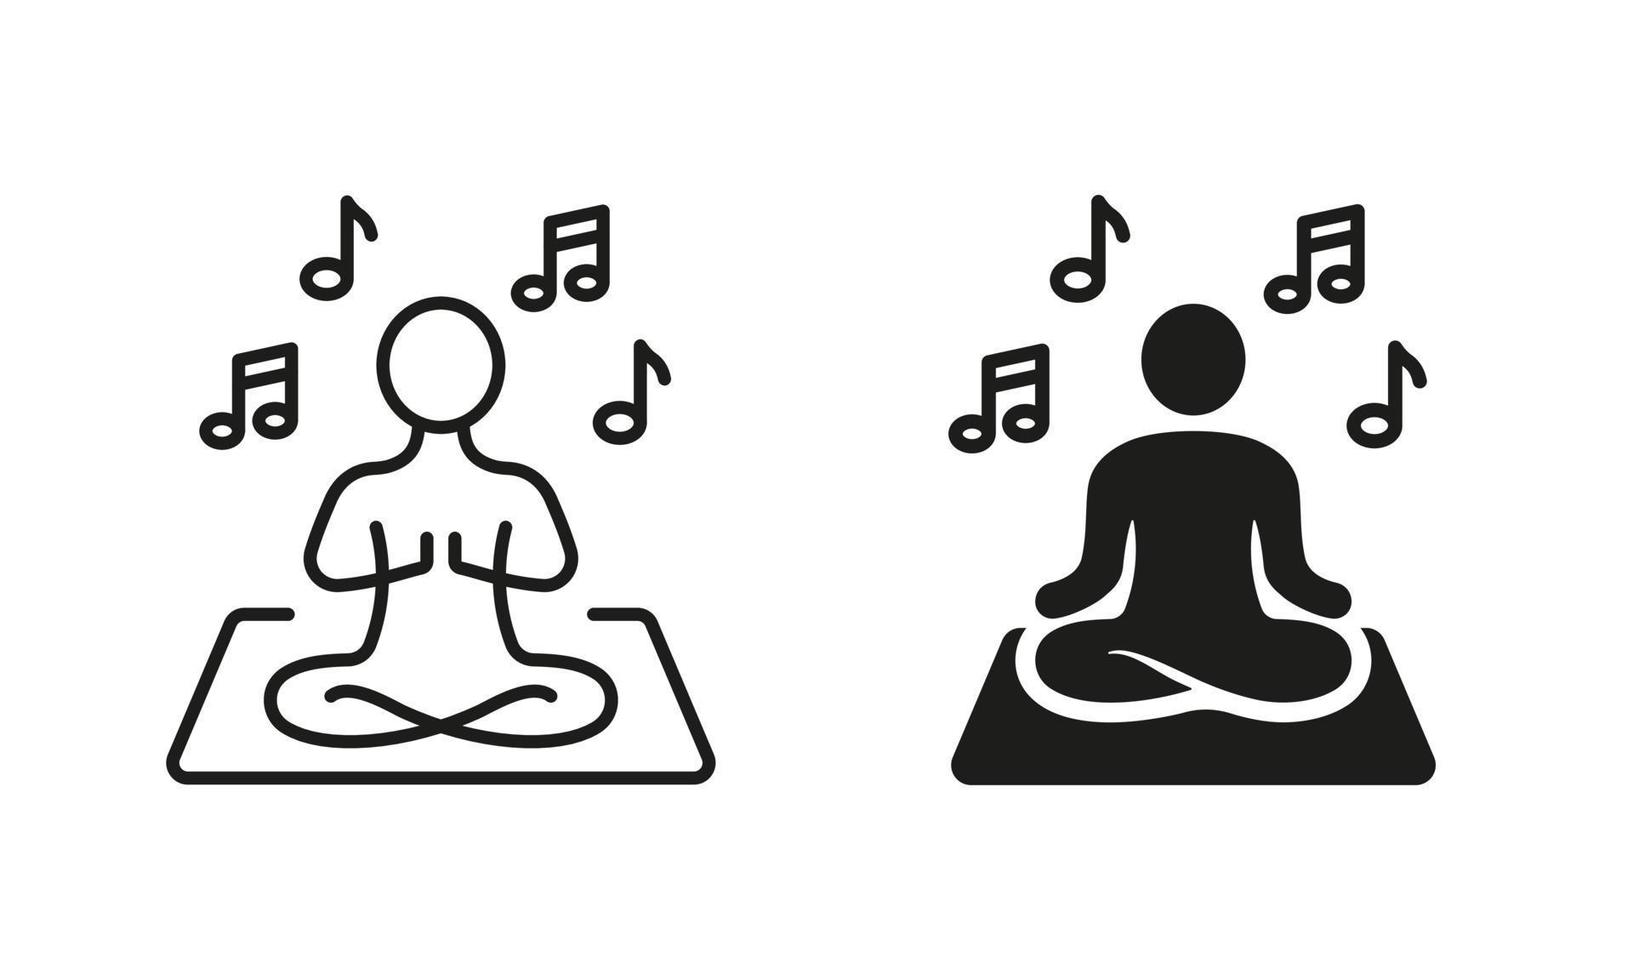 Yoga Concentration, Meditation, Listen to Music Silhouette and Line Icon Set. Harmony Man Relax in Lotus Pose Meditate Pictogram. Listening to Music. Editable Stroke. Isolated Vector Illustration.